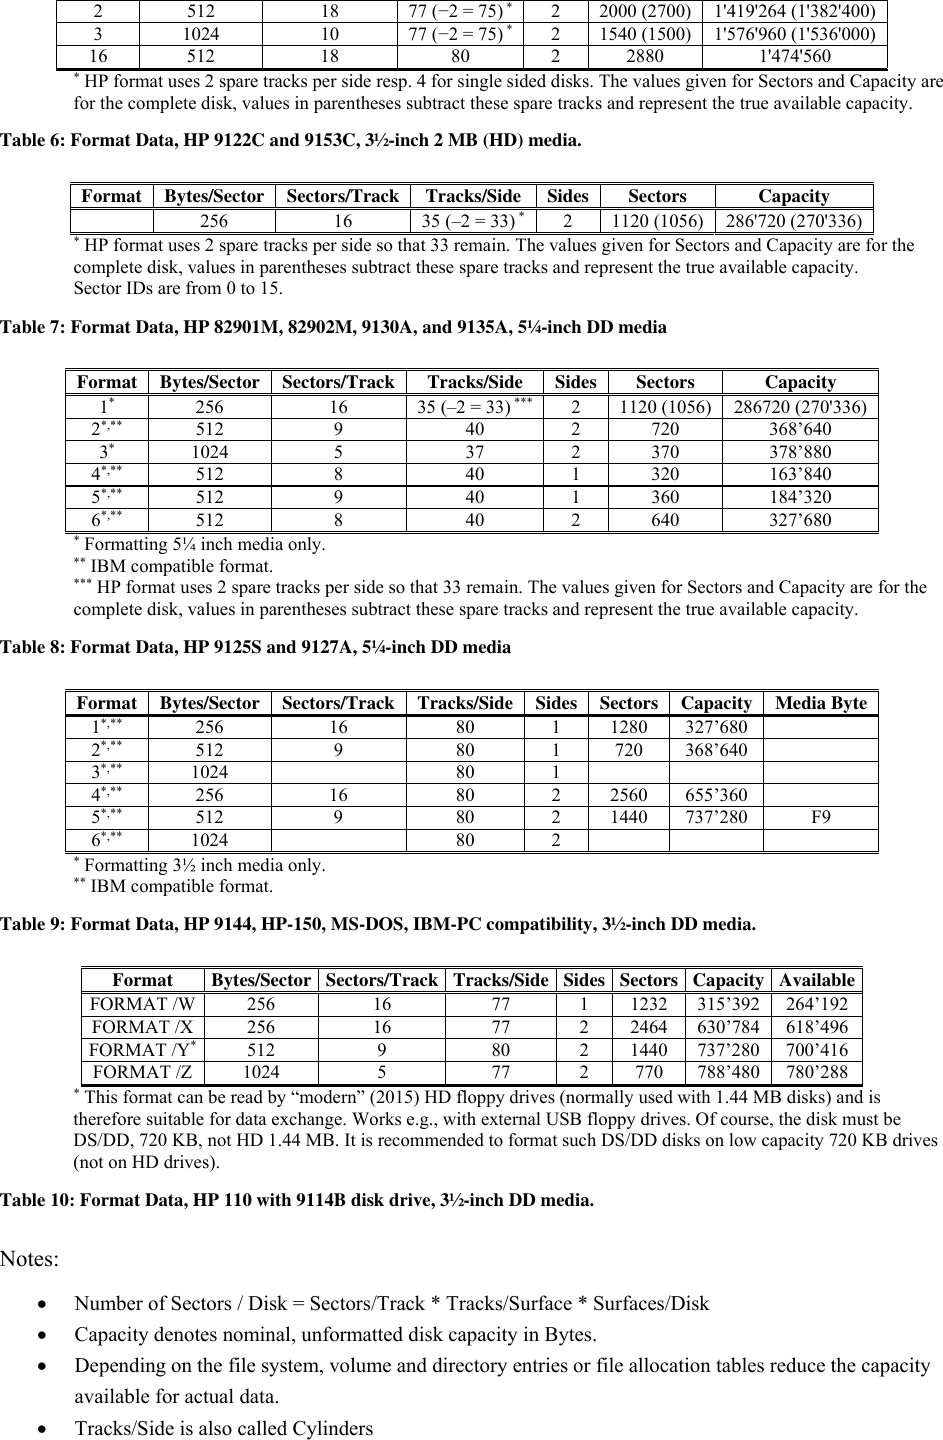 Page 2 of 3 - HP Flexible Disk Formatsx Formats